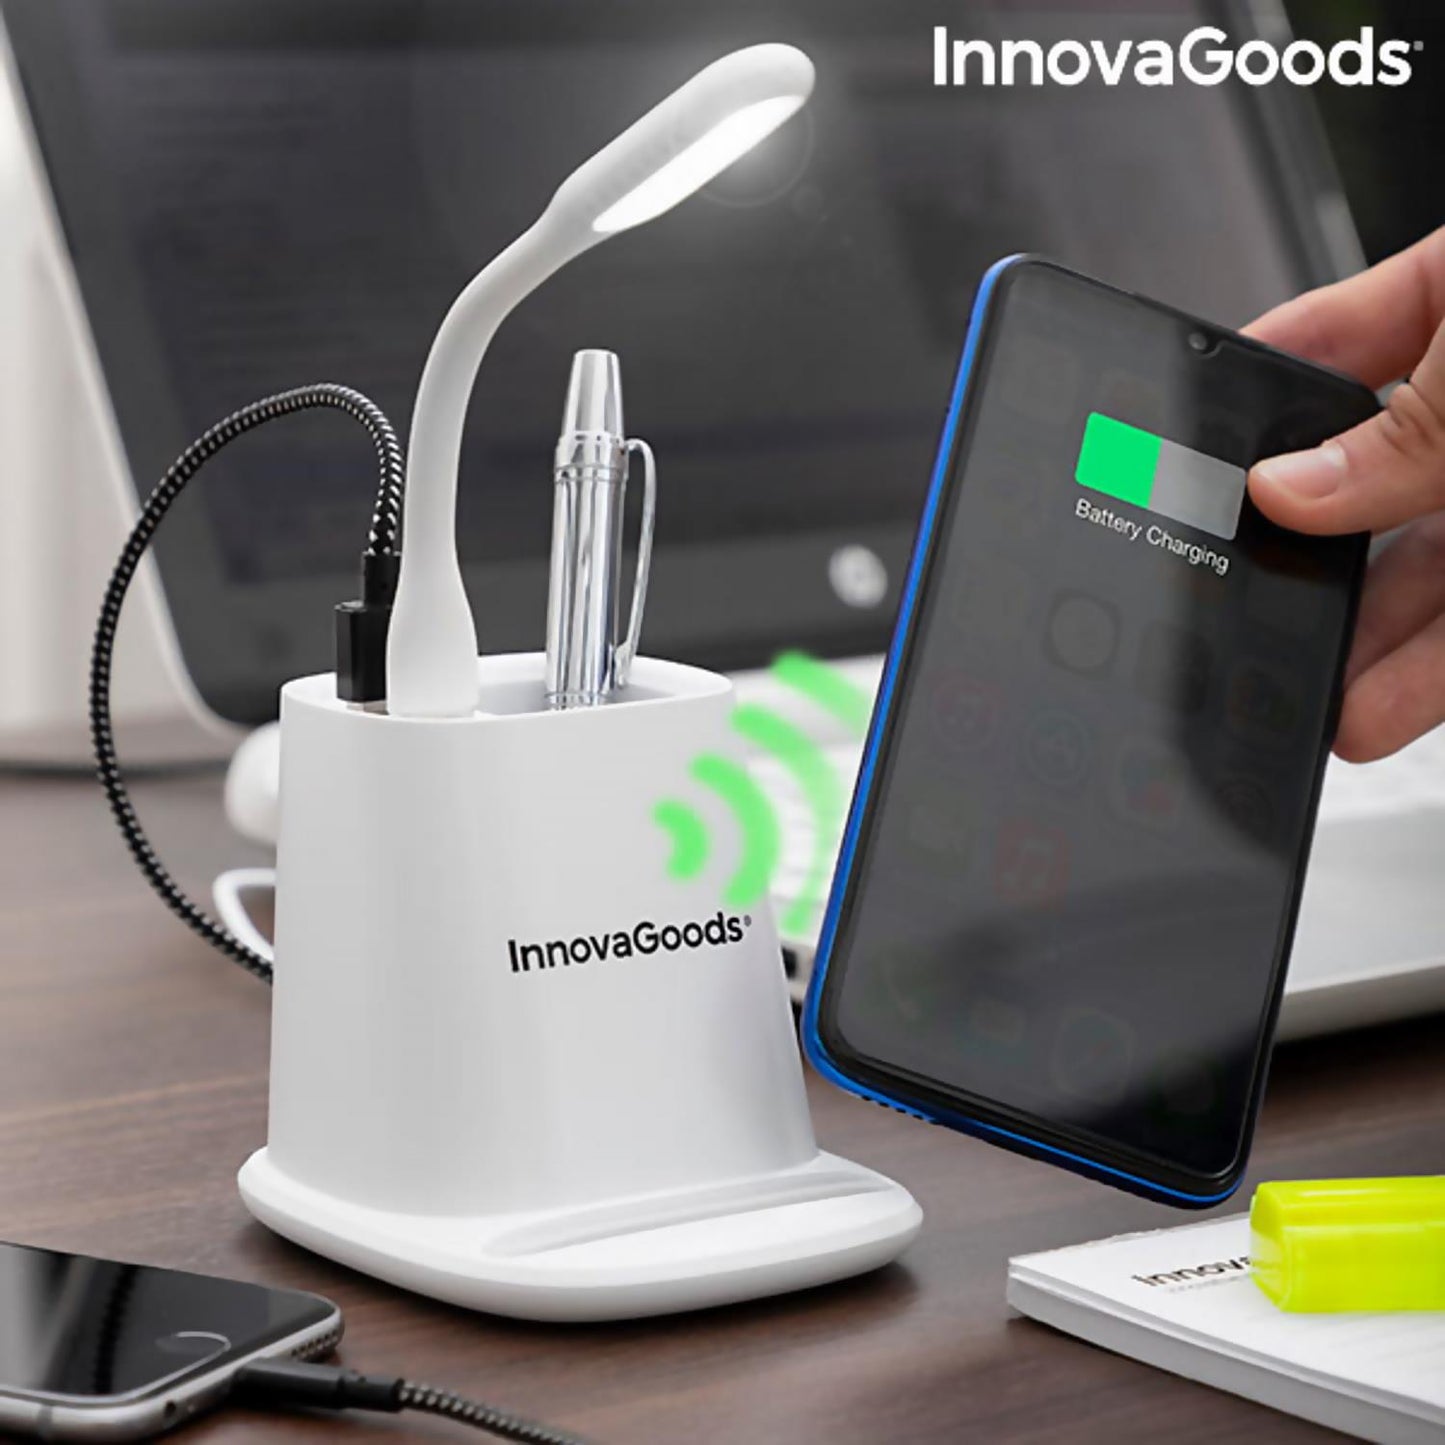 5-In-1 Qi Wireless Charging Pad With Multiple Usb Ports